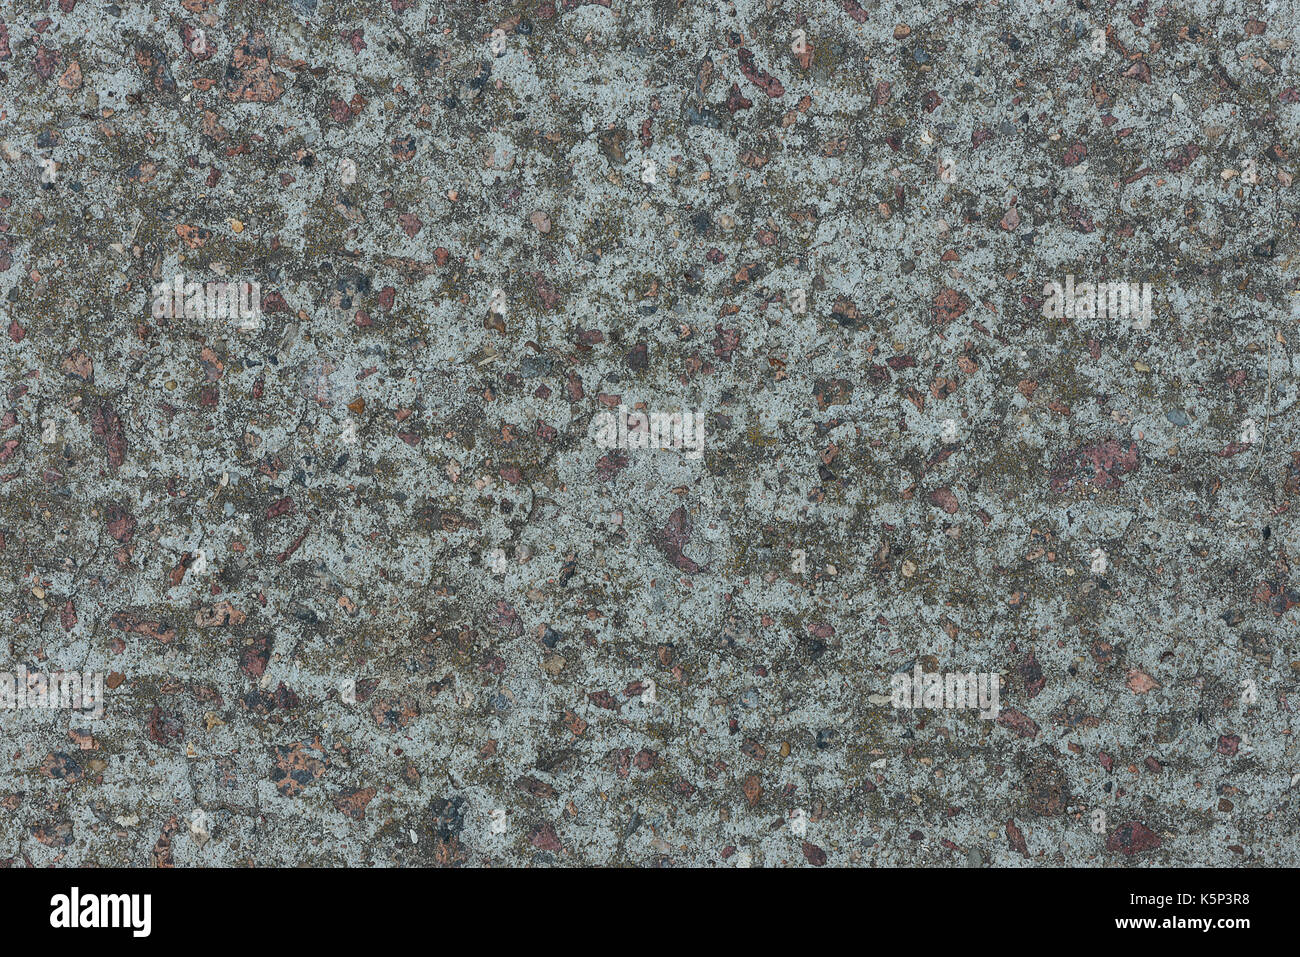 Concrete Ground Texture High Resolution Stock Photography And Images